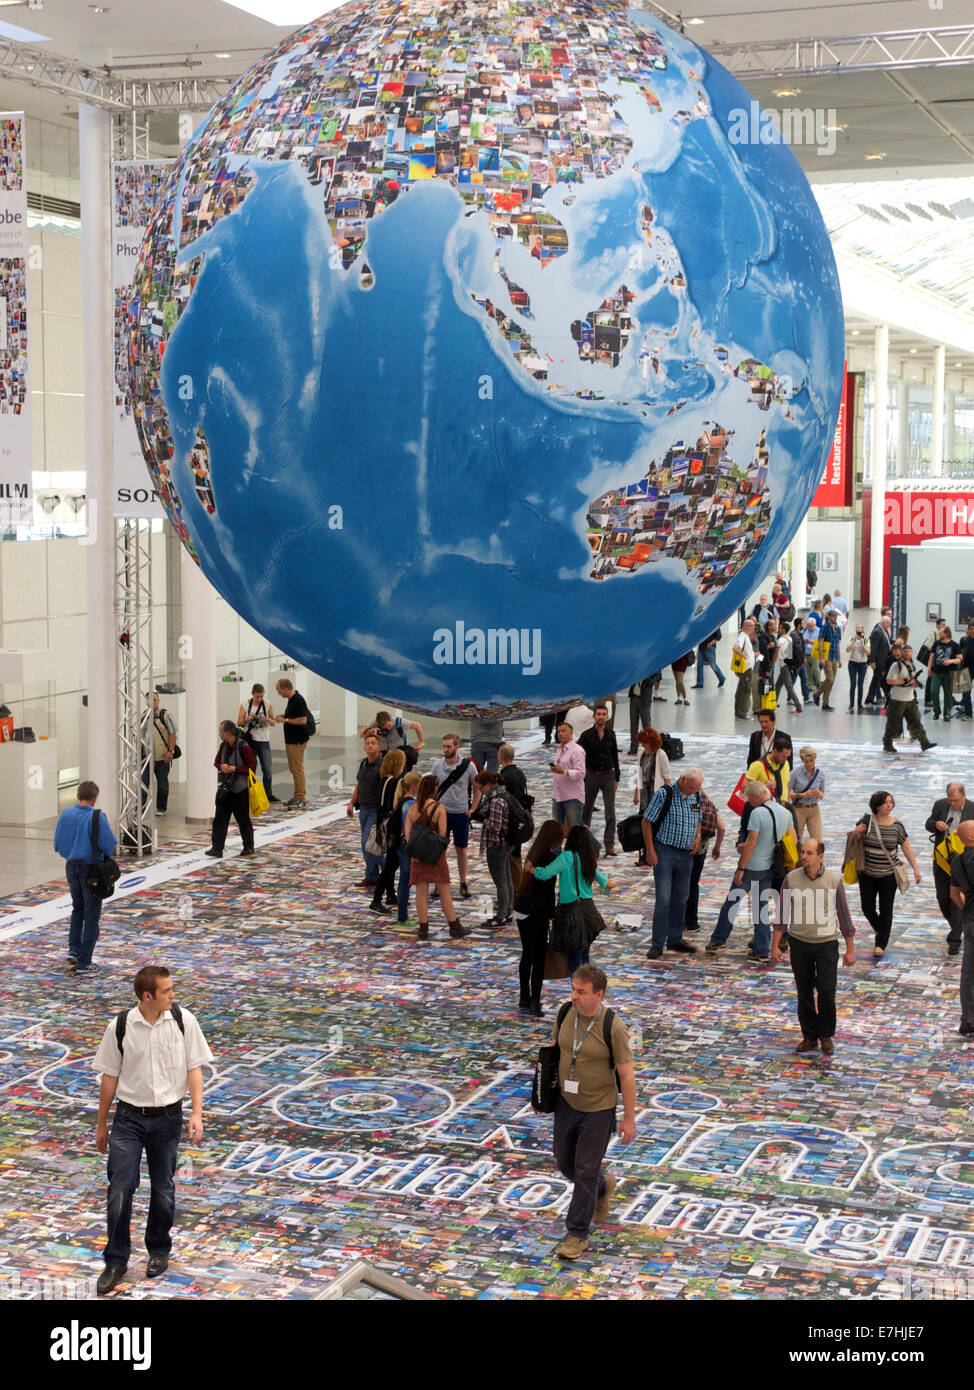 Photokina 2014 entrance with photo carpet and big globe made with pictures, and lots of visitors. Cologne, NRW, Germany Stock Photo